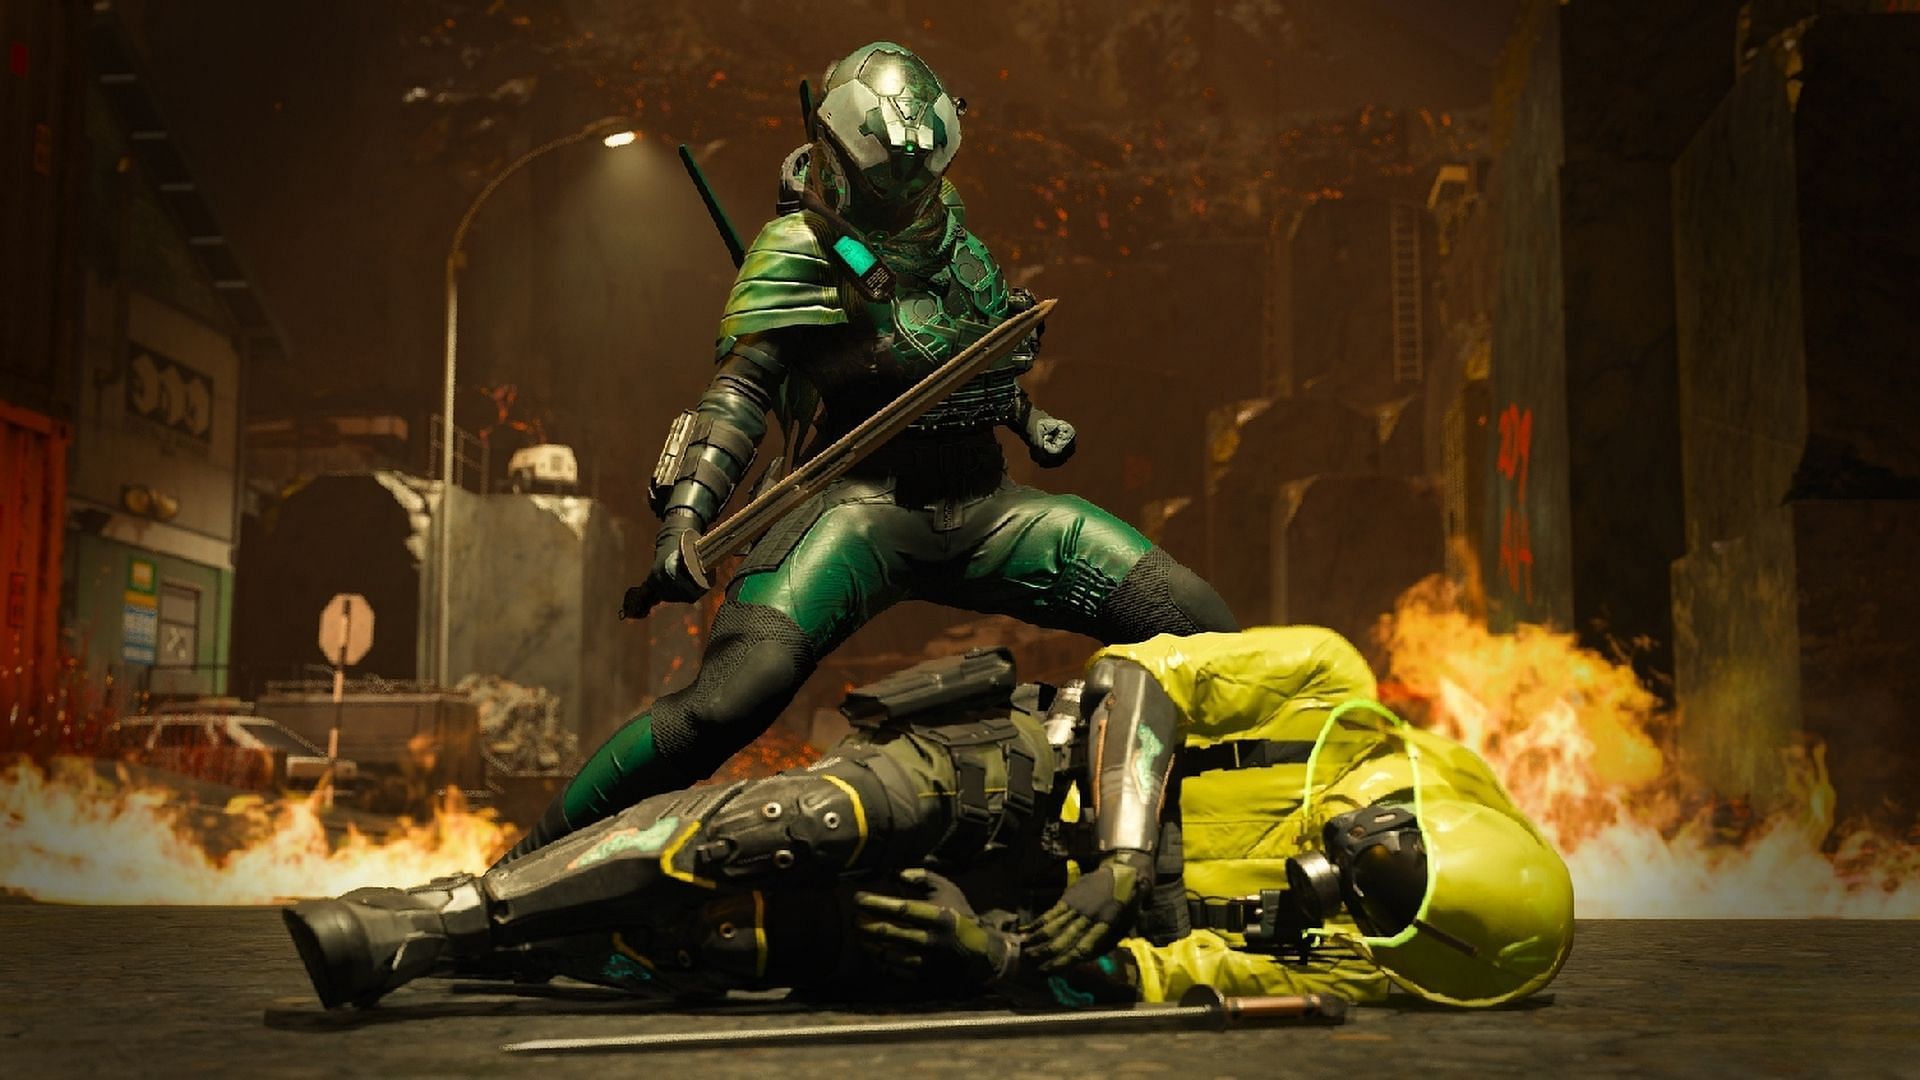 An Operator taking down an enemy using a melee weapon in Warzone